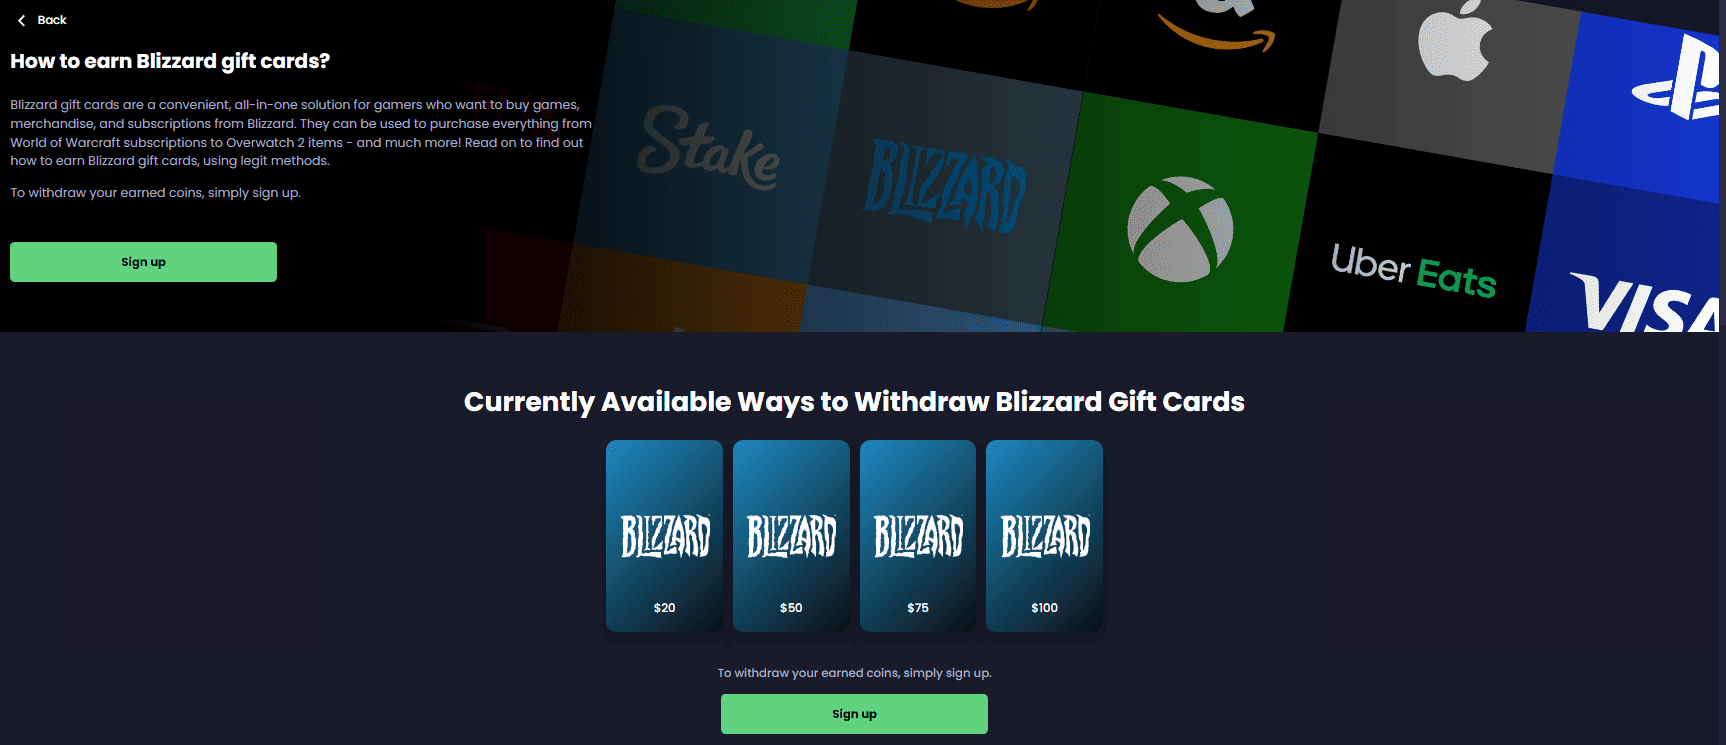 Discover the Easy Way to Earn Blizzard Gift Cards - Freecash